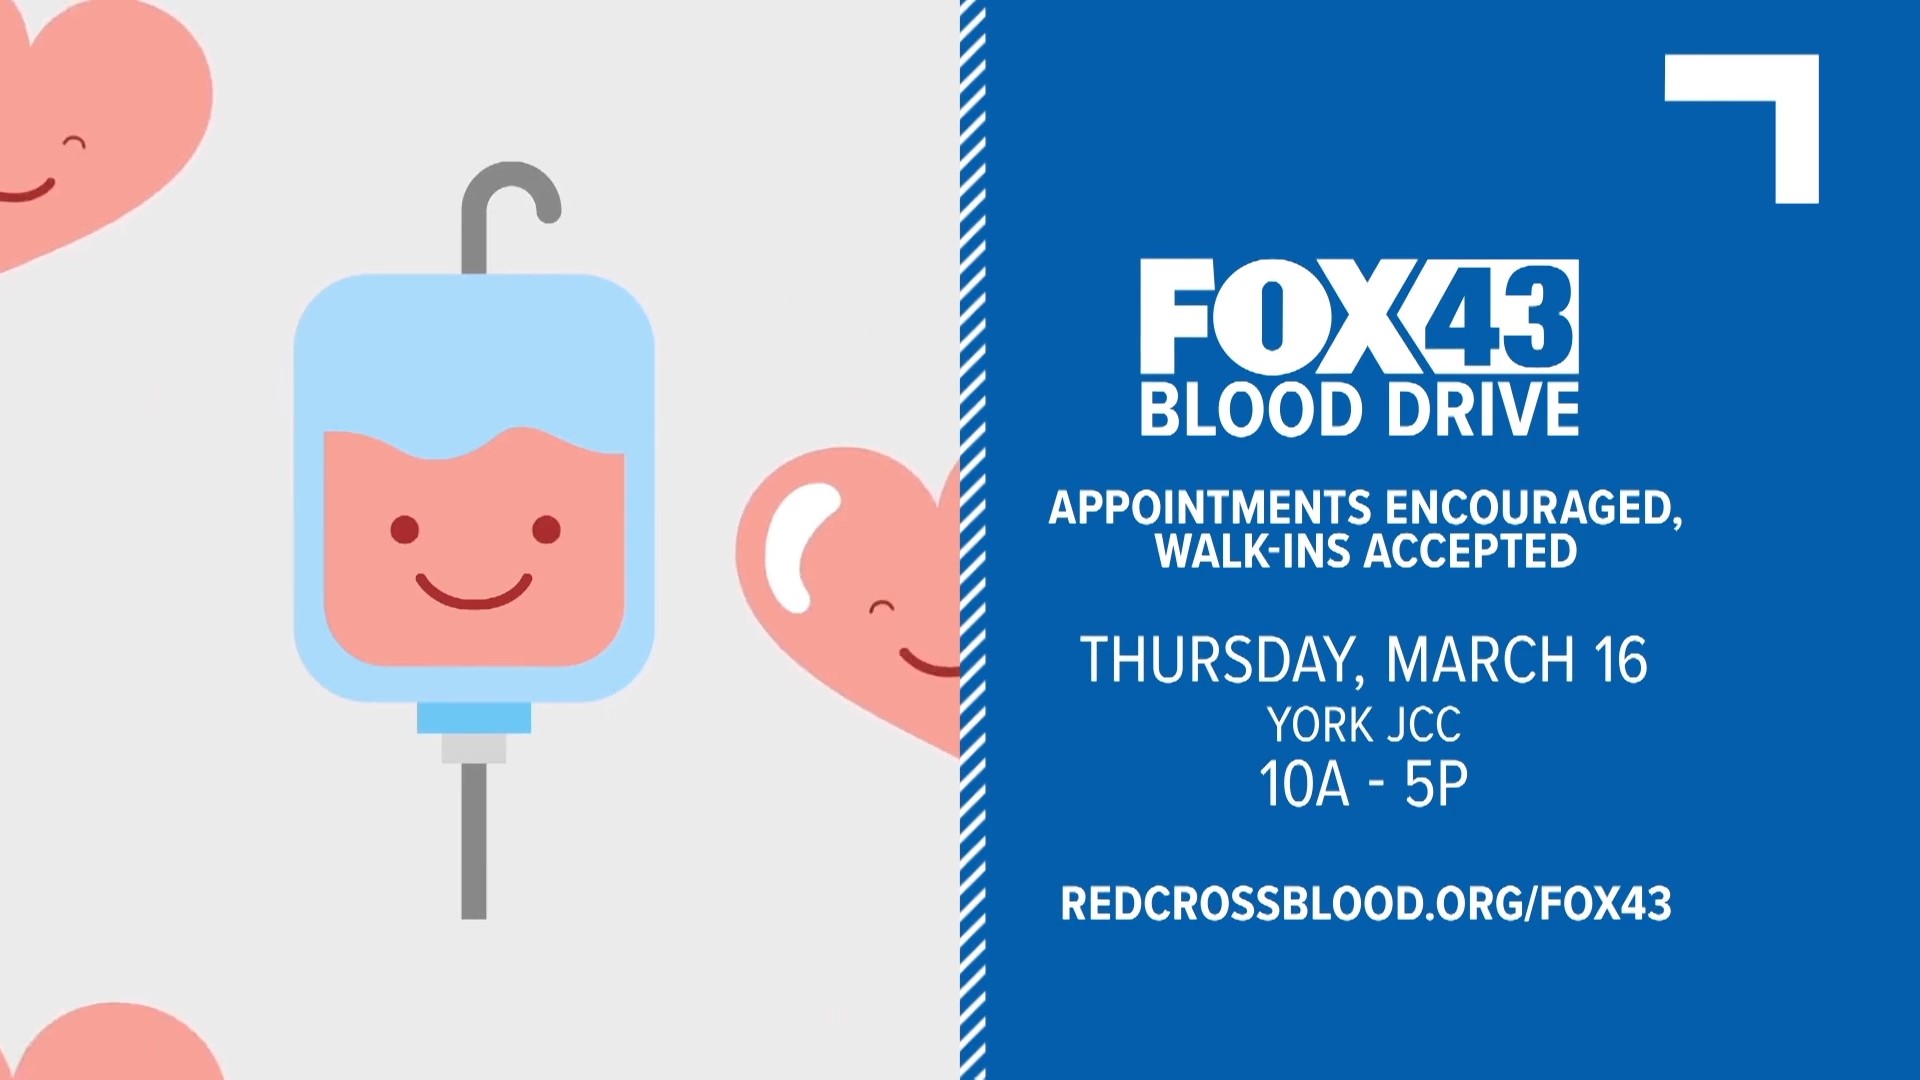 The blood drive will be held with the help of the American Red Cross at the York JCC from 10 a.m. to 5 p.m.